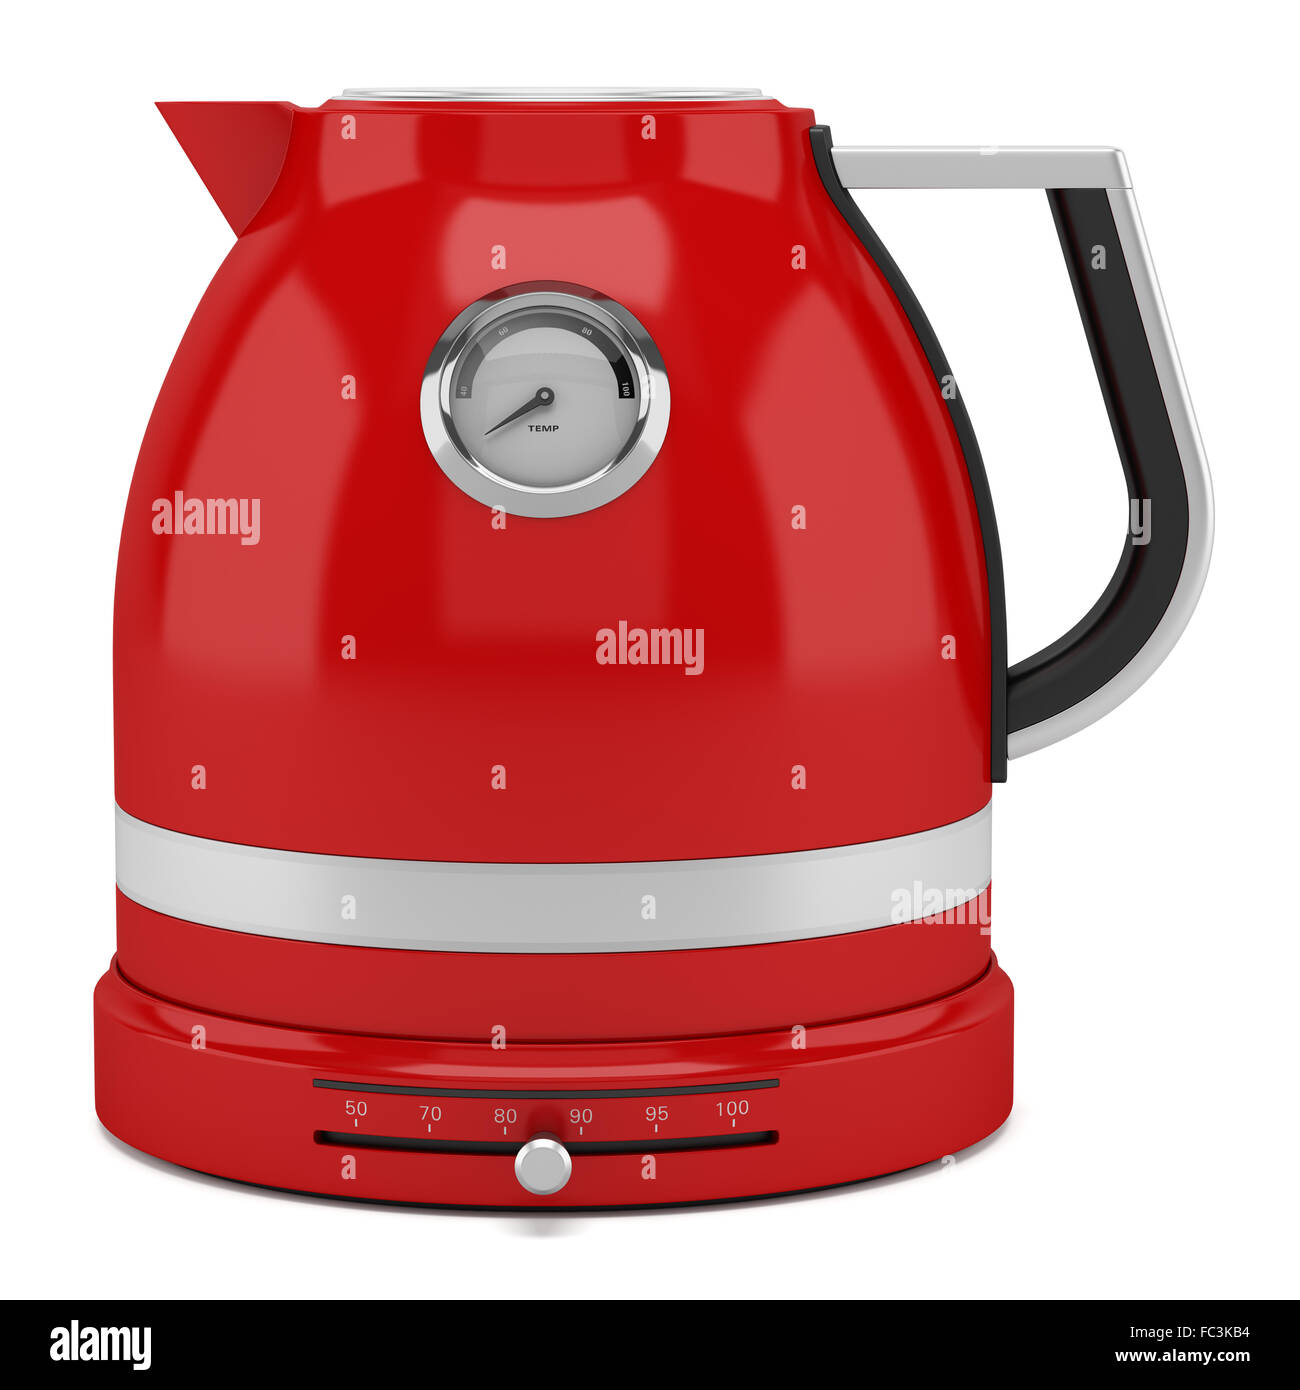 https://c8.alamy.com/comp/FC3KB4/red-electric-kettle-isolated-on-white-background-FC3KB4.jpg